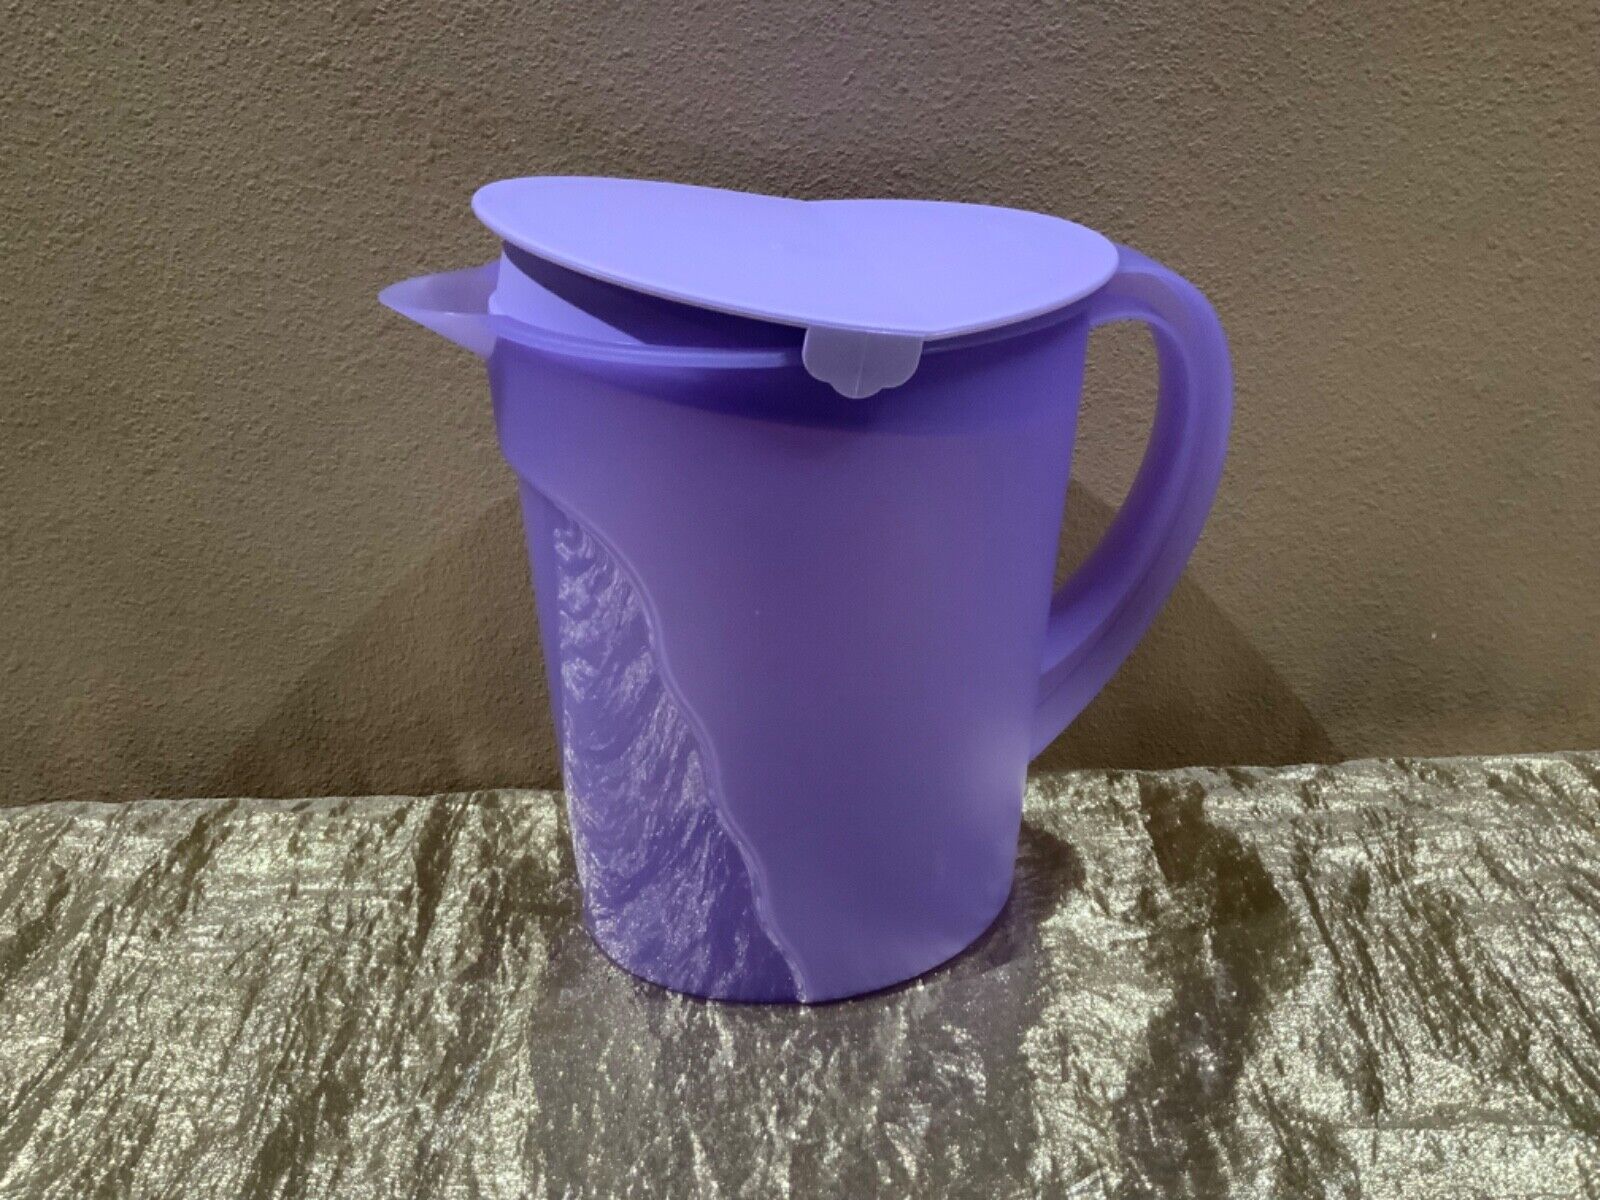 New Tupperware Beautiful Jumbo Expression Pitcher 1 Gallon 3.7L in Lilac Color